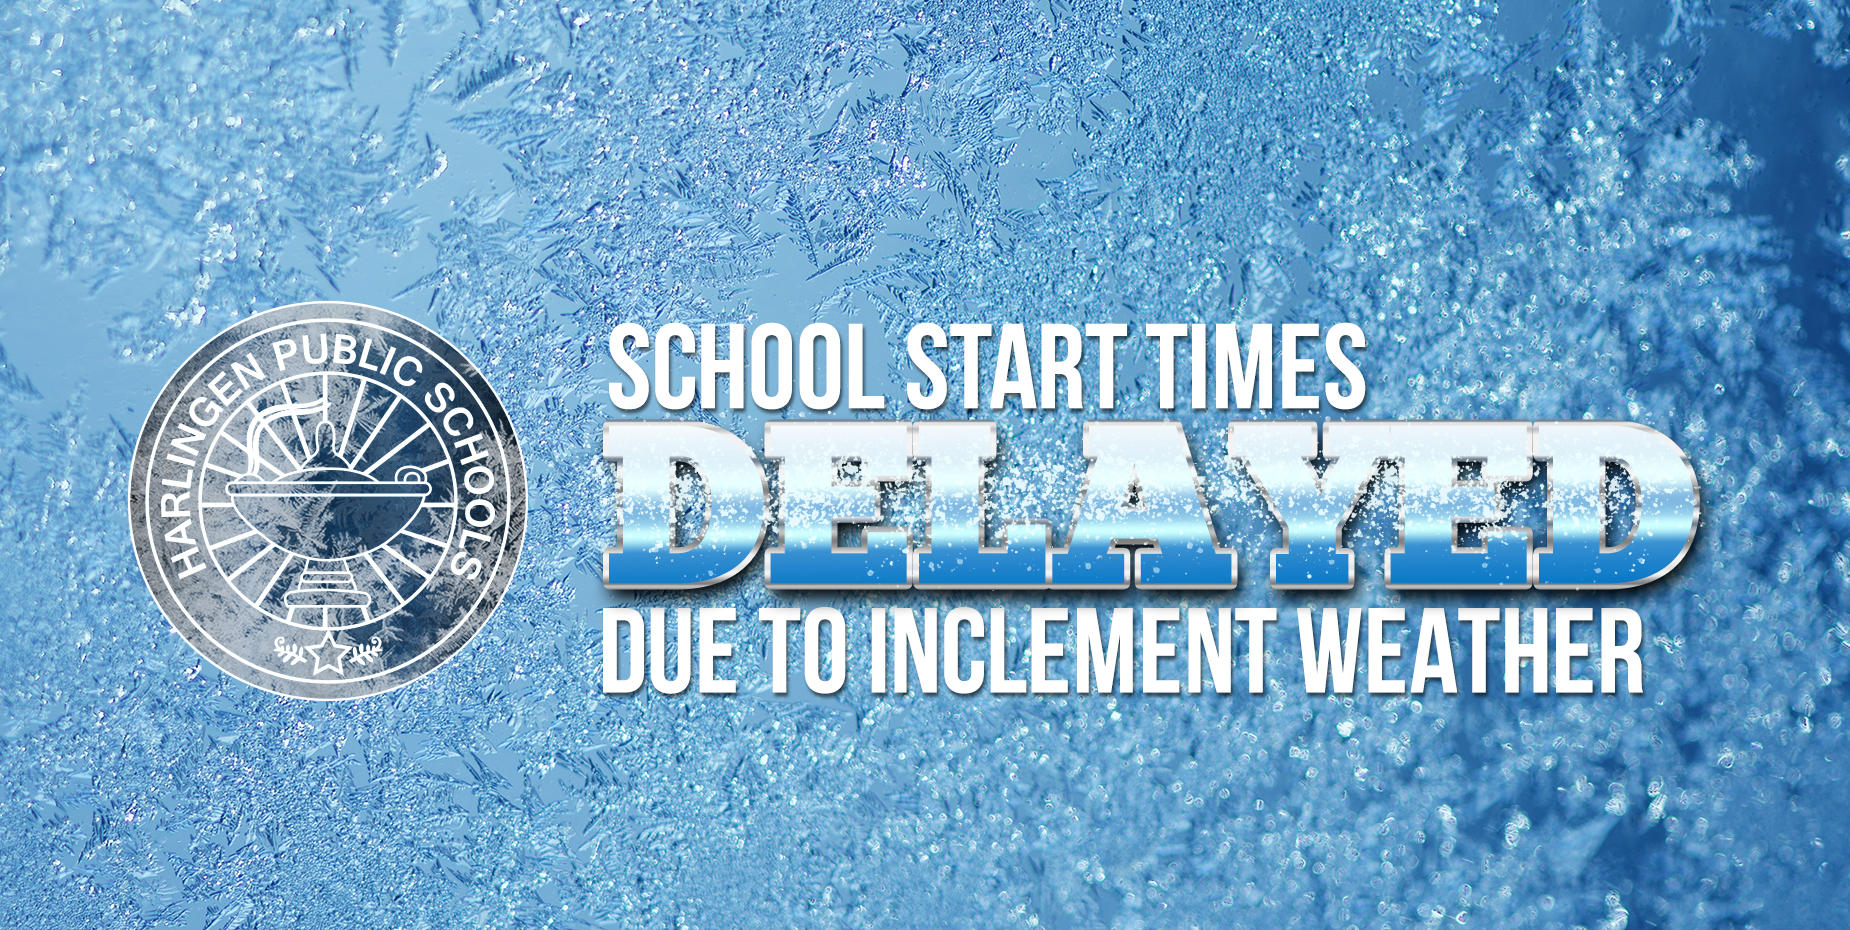 School start times delayed for January 21 due to inclement weather